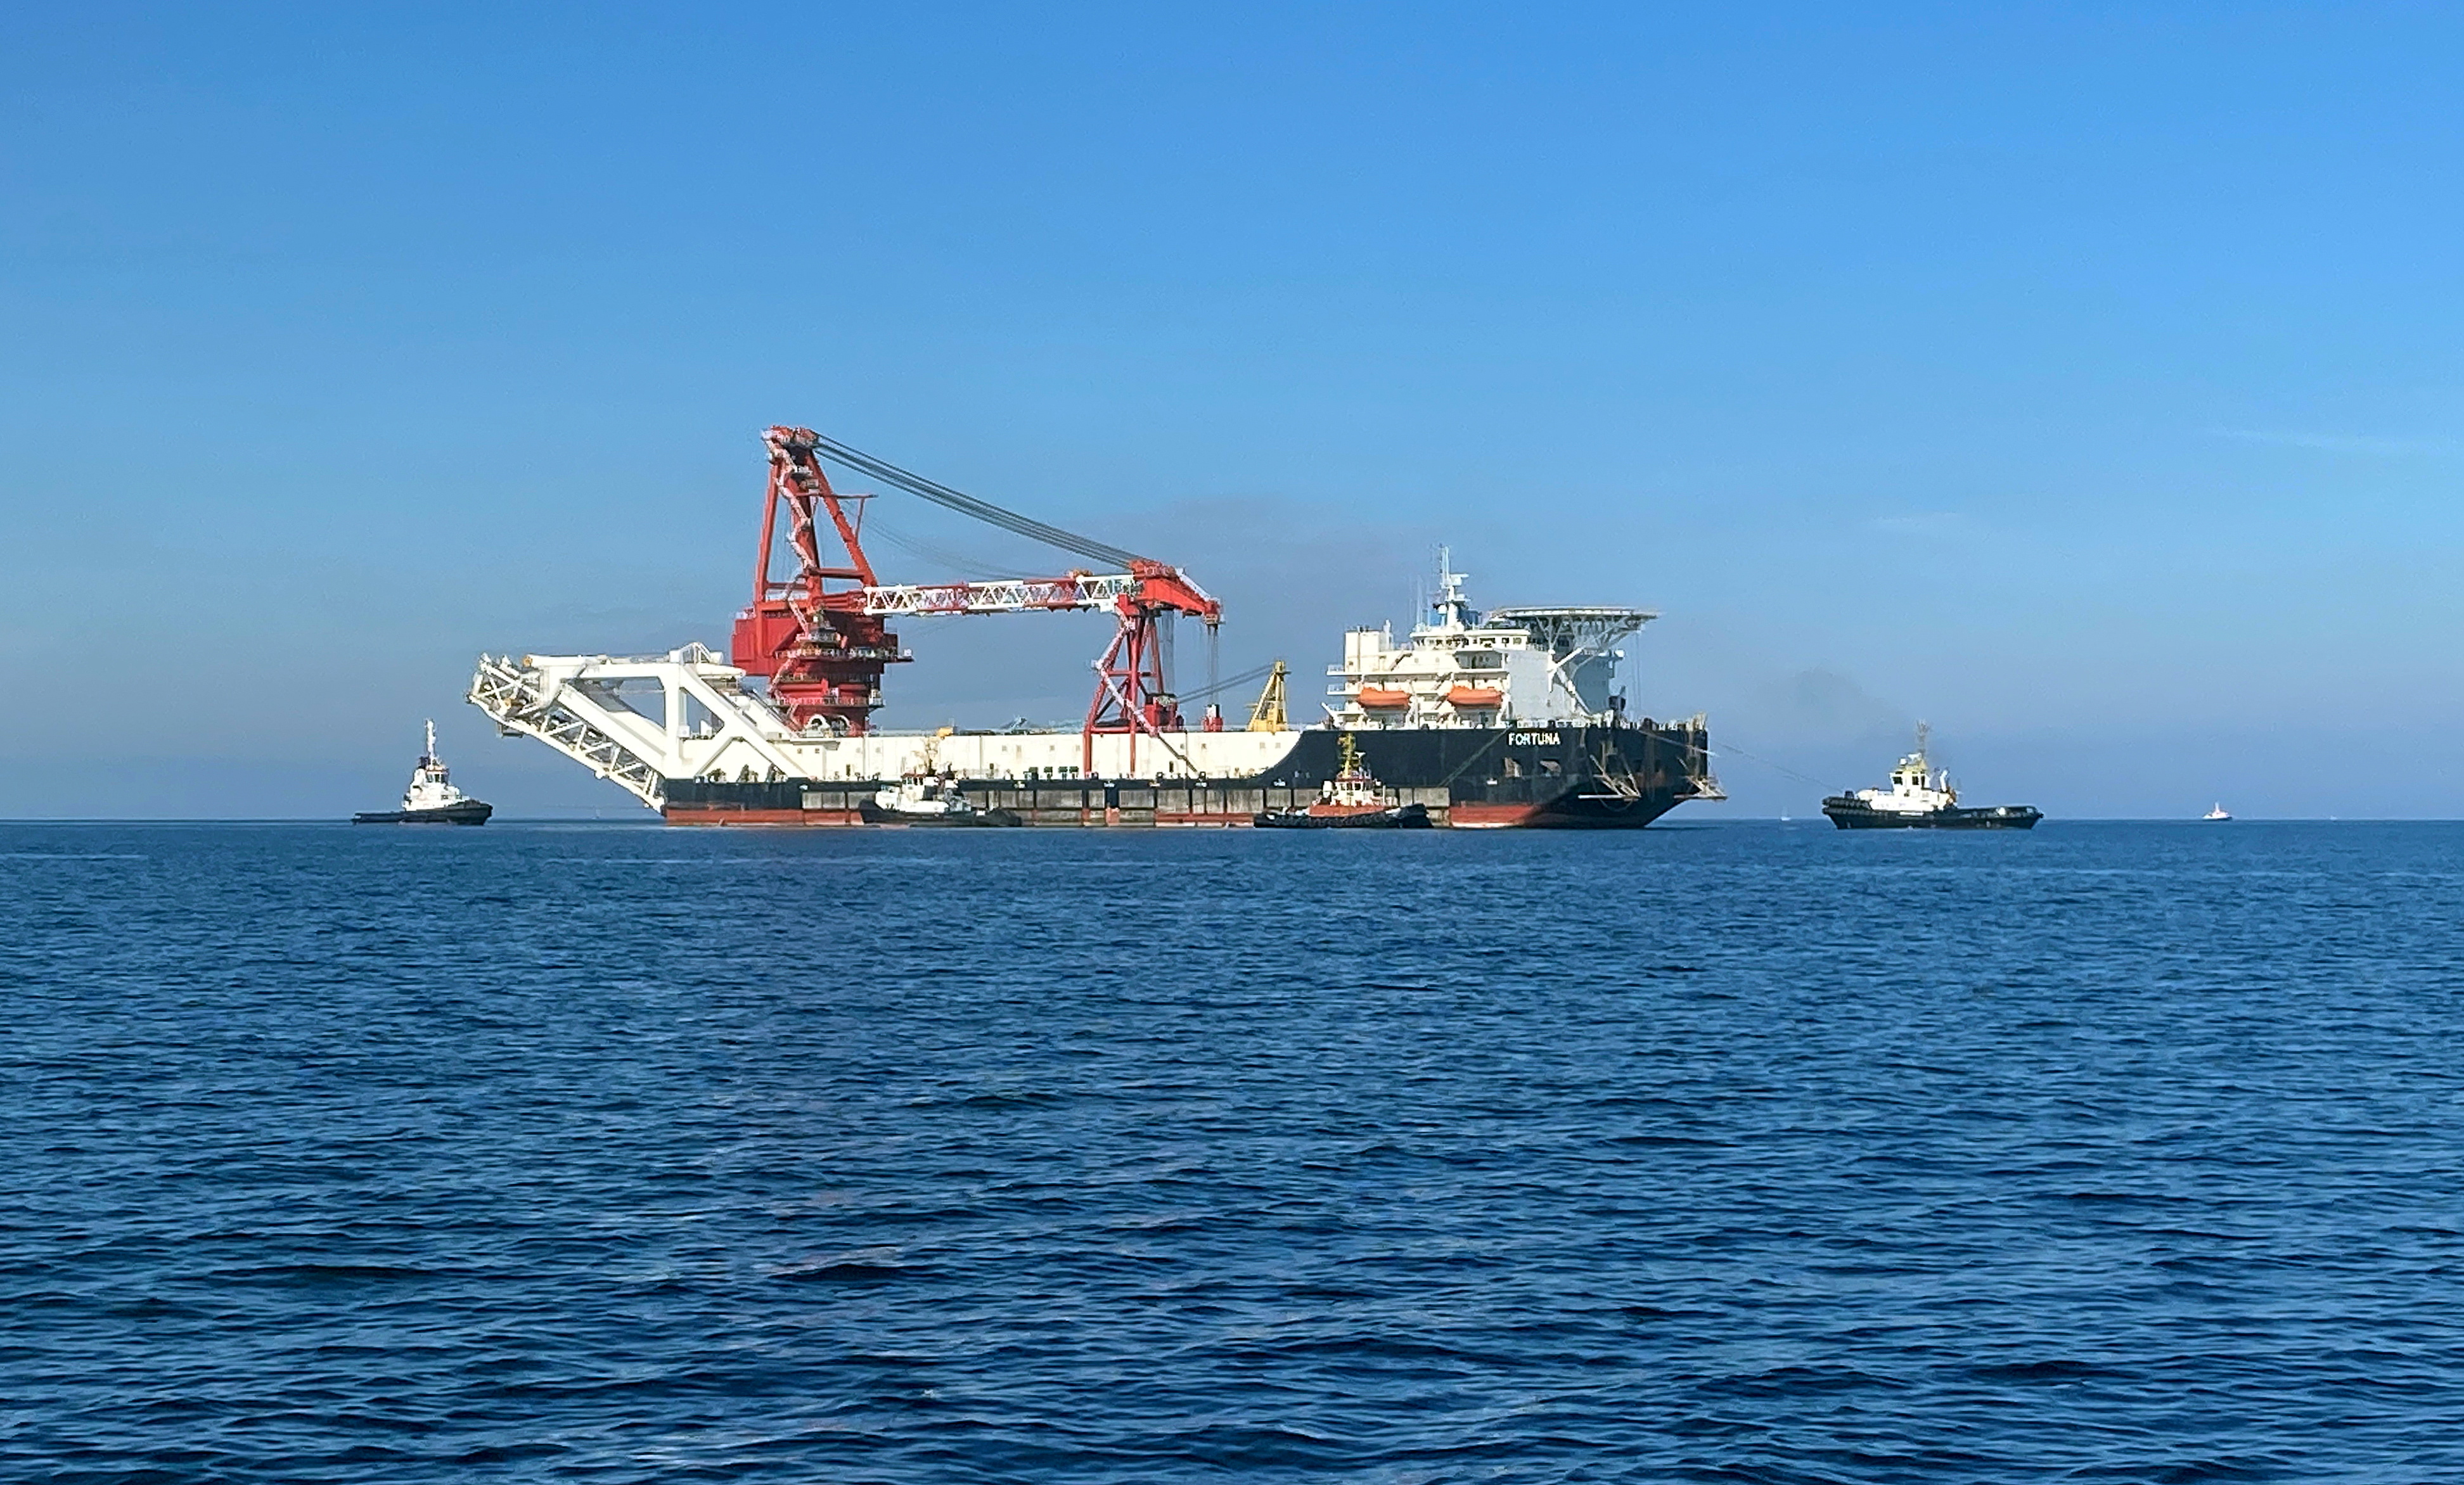 The pipe-laying vessel Fortuna makes its way to Wismar